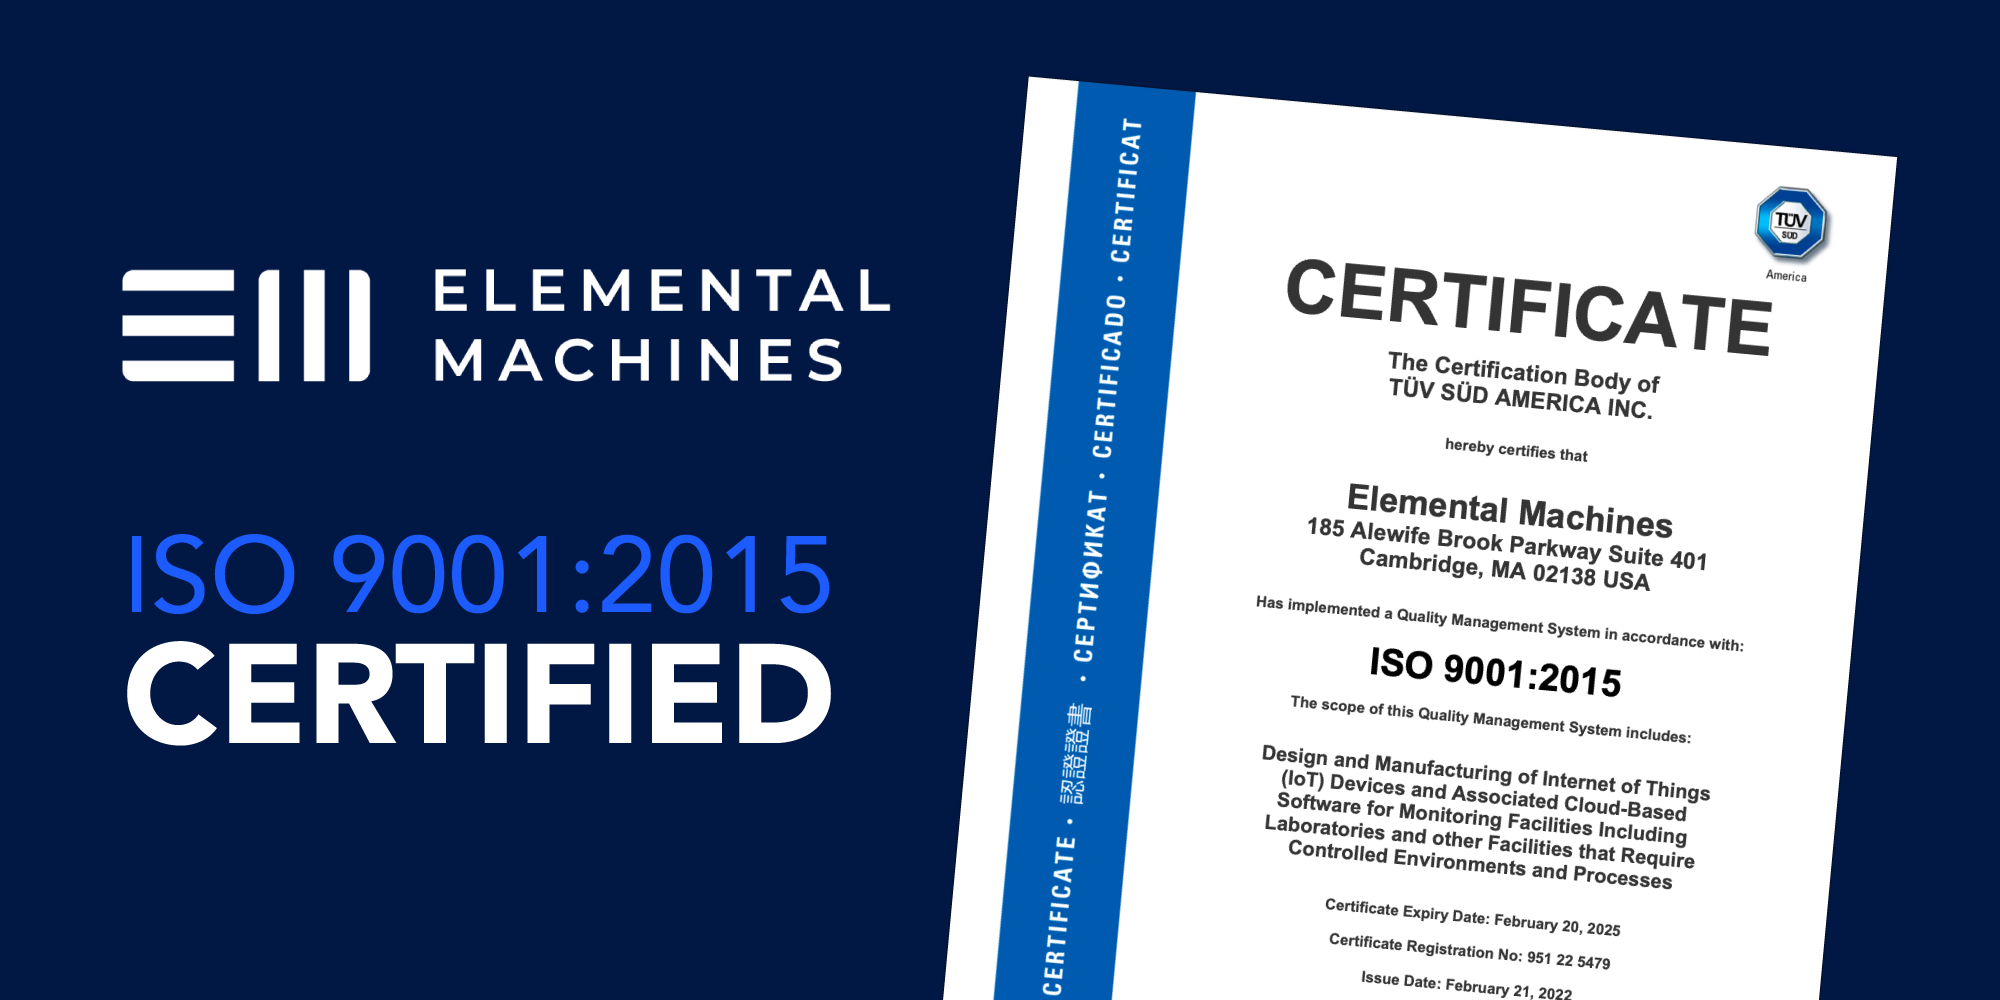 Elemental Machines Announces Its ISO 9001:2015 Certification